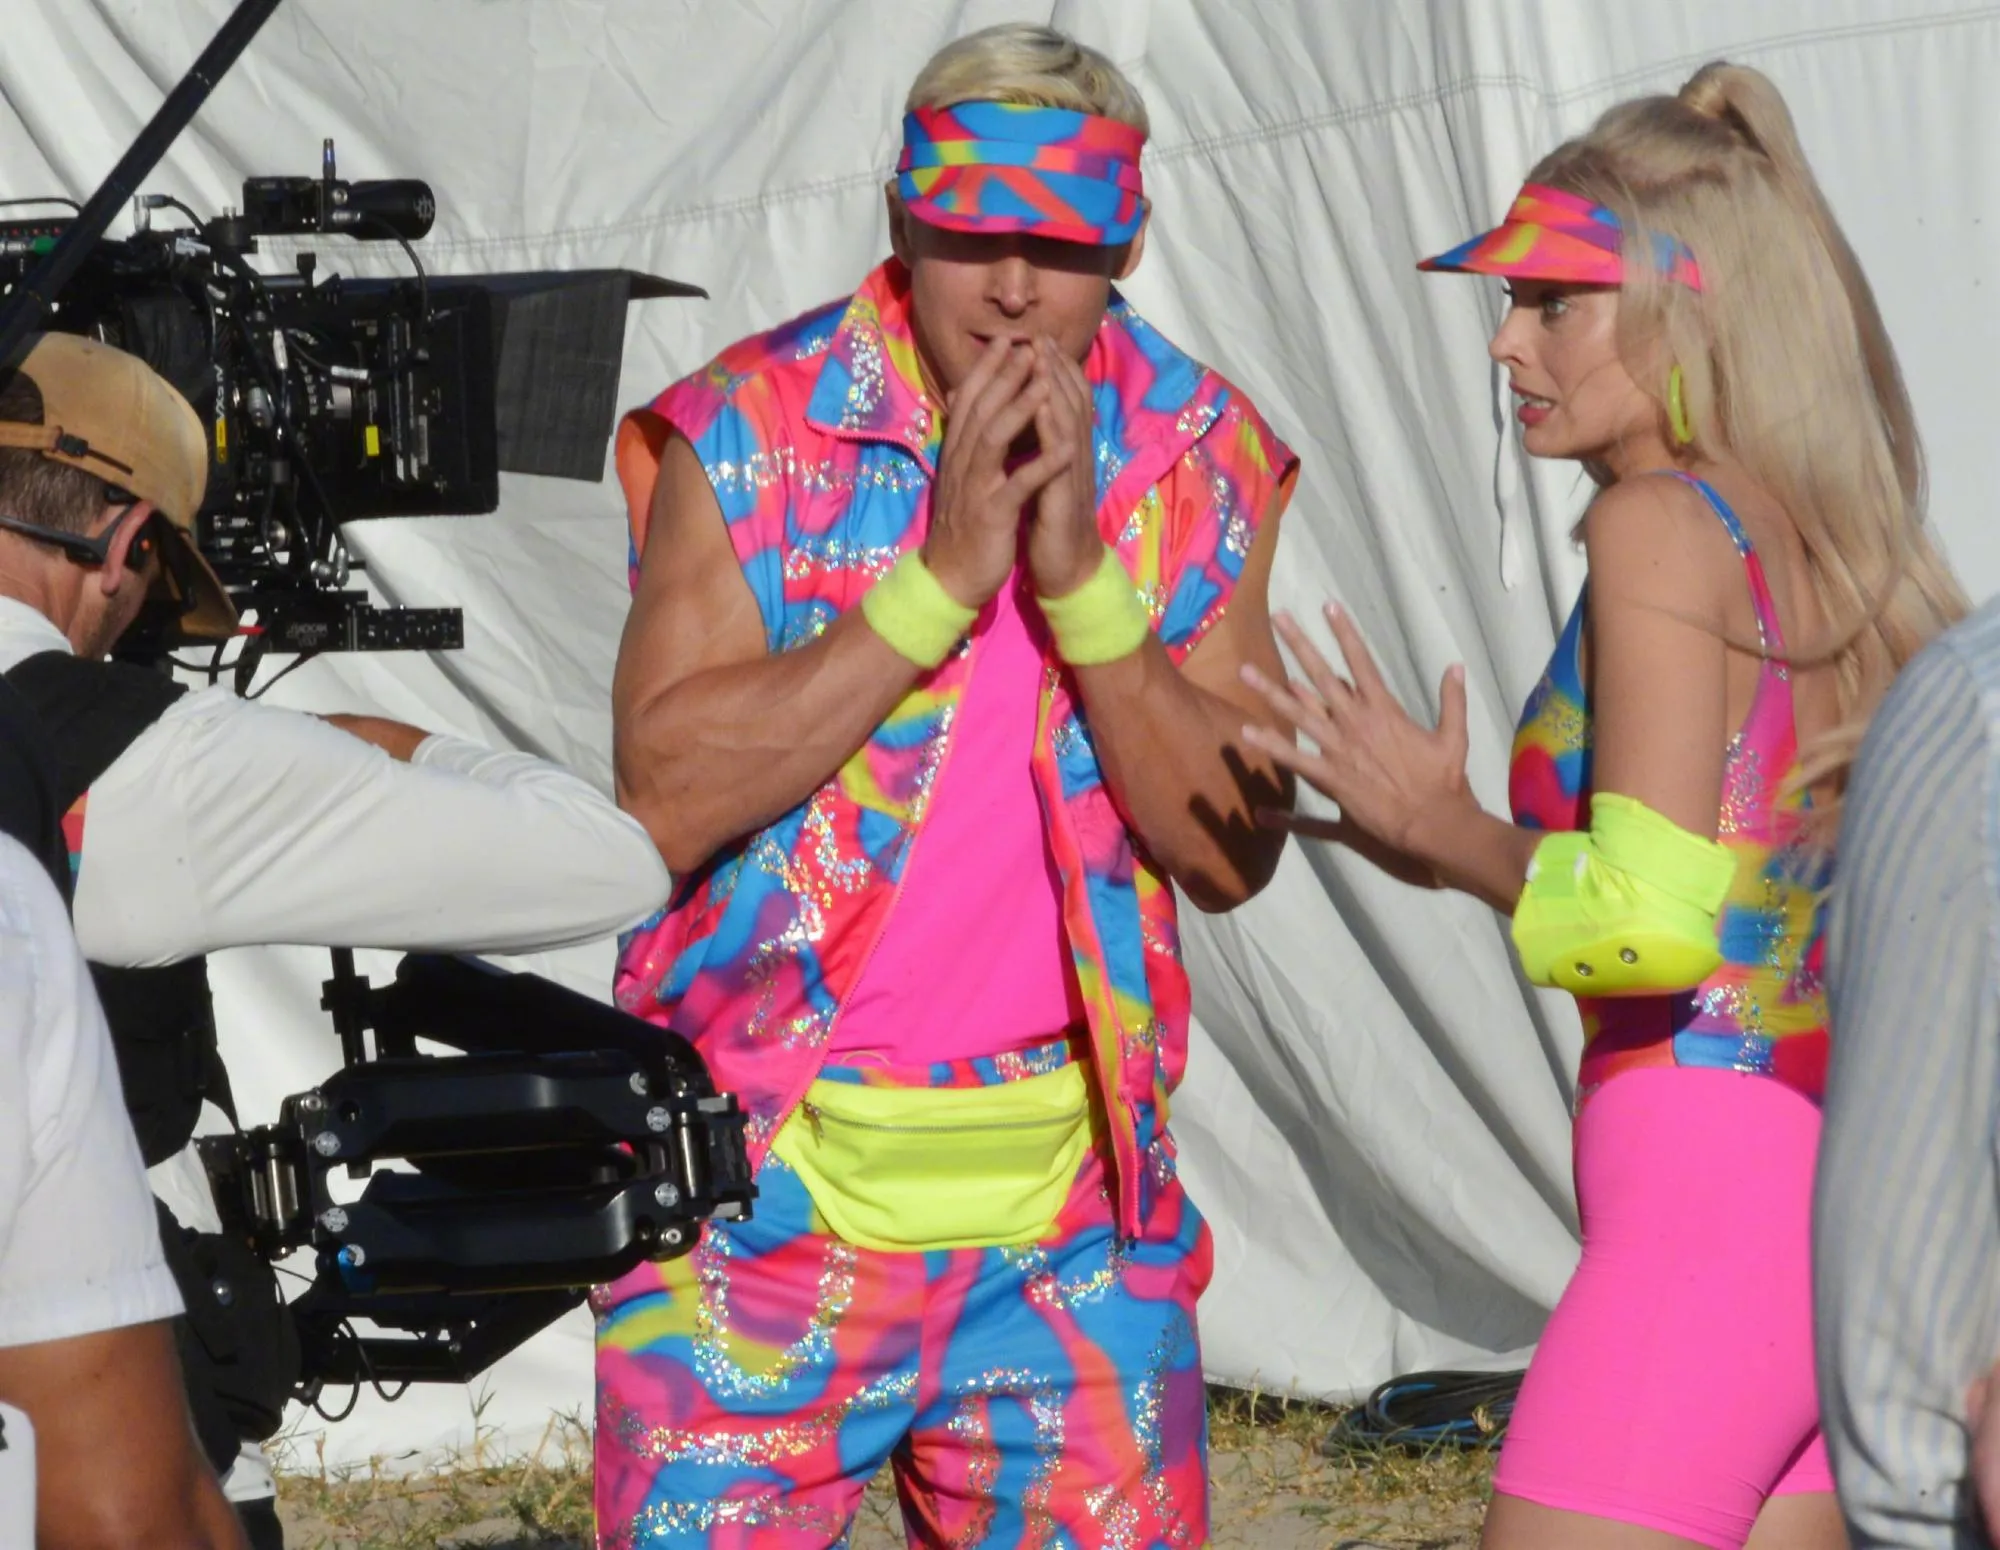 New set photos of 'Barbie' revealed, Margot Robbie as strong barbie beating rogue | FMV6